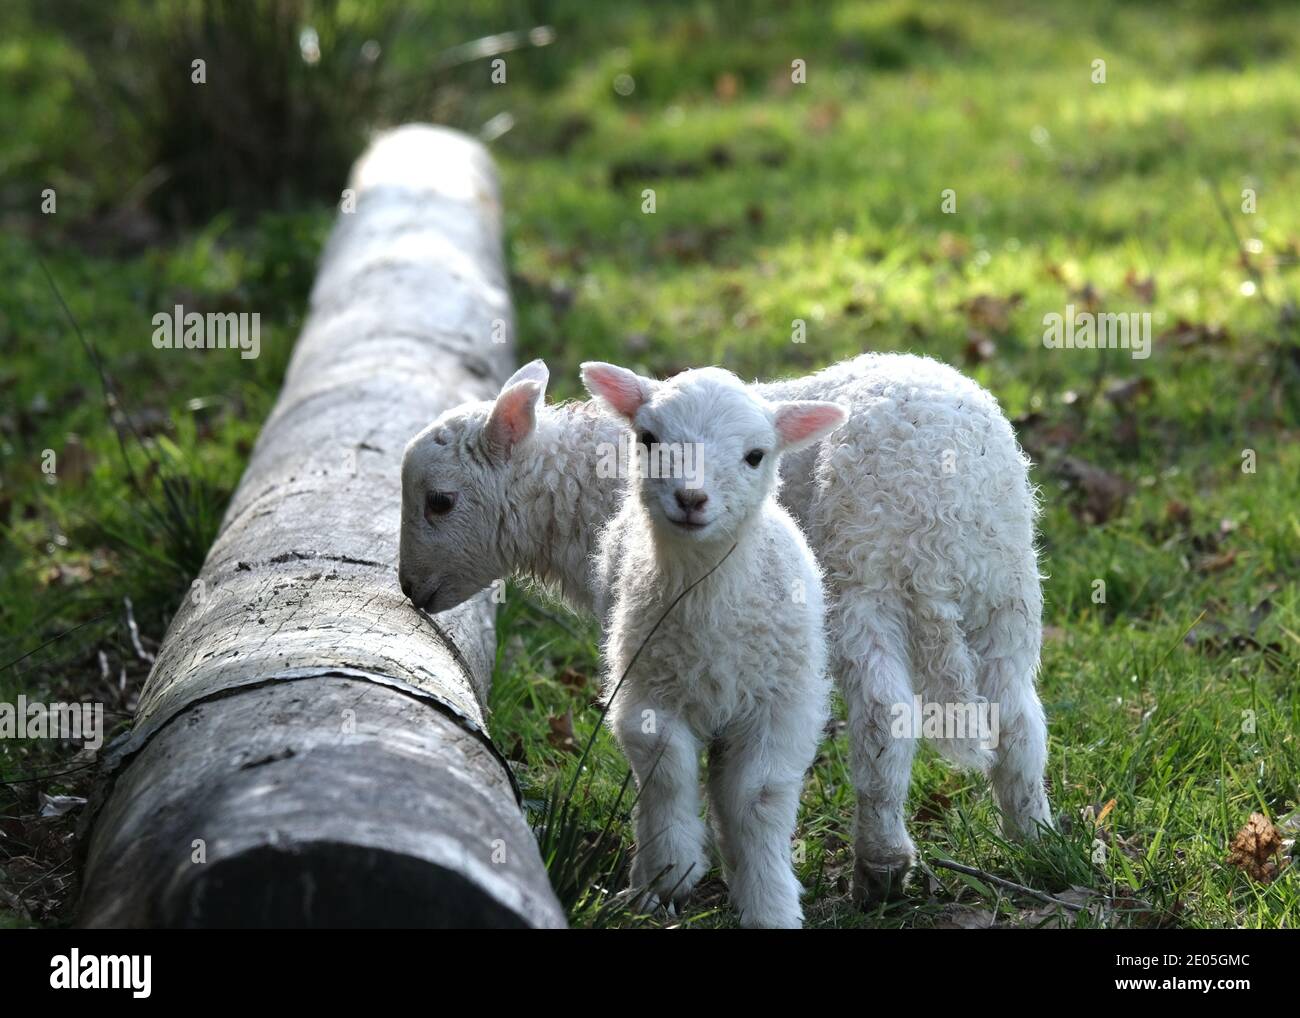 Two very cute, young Welsh lambs in a grassy field Stock Photo